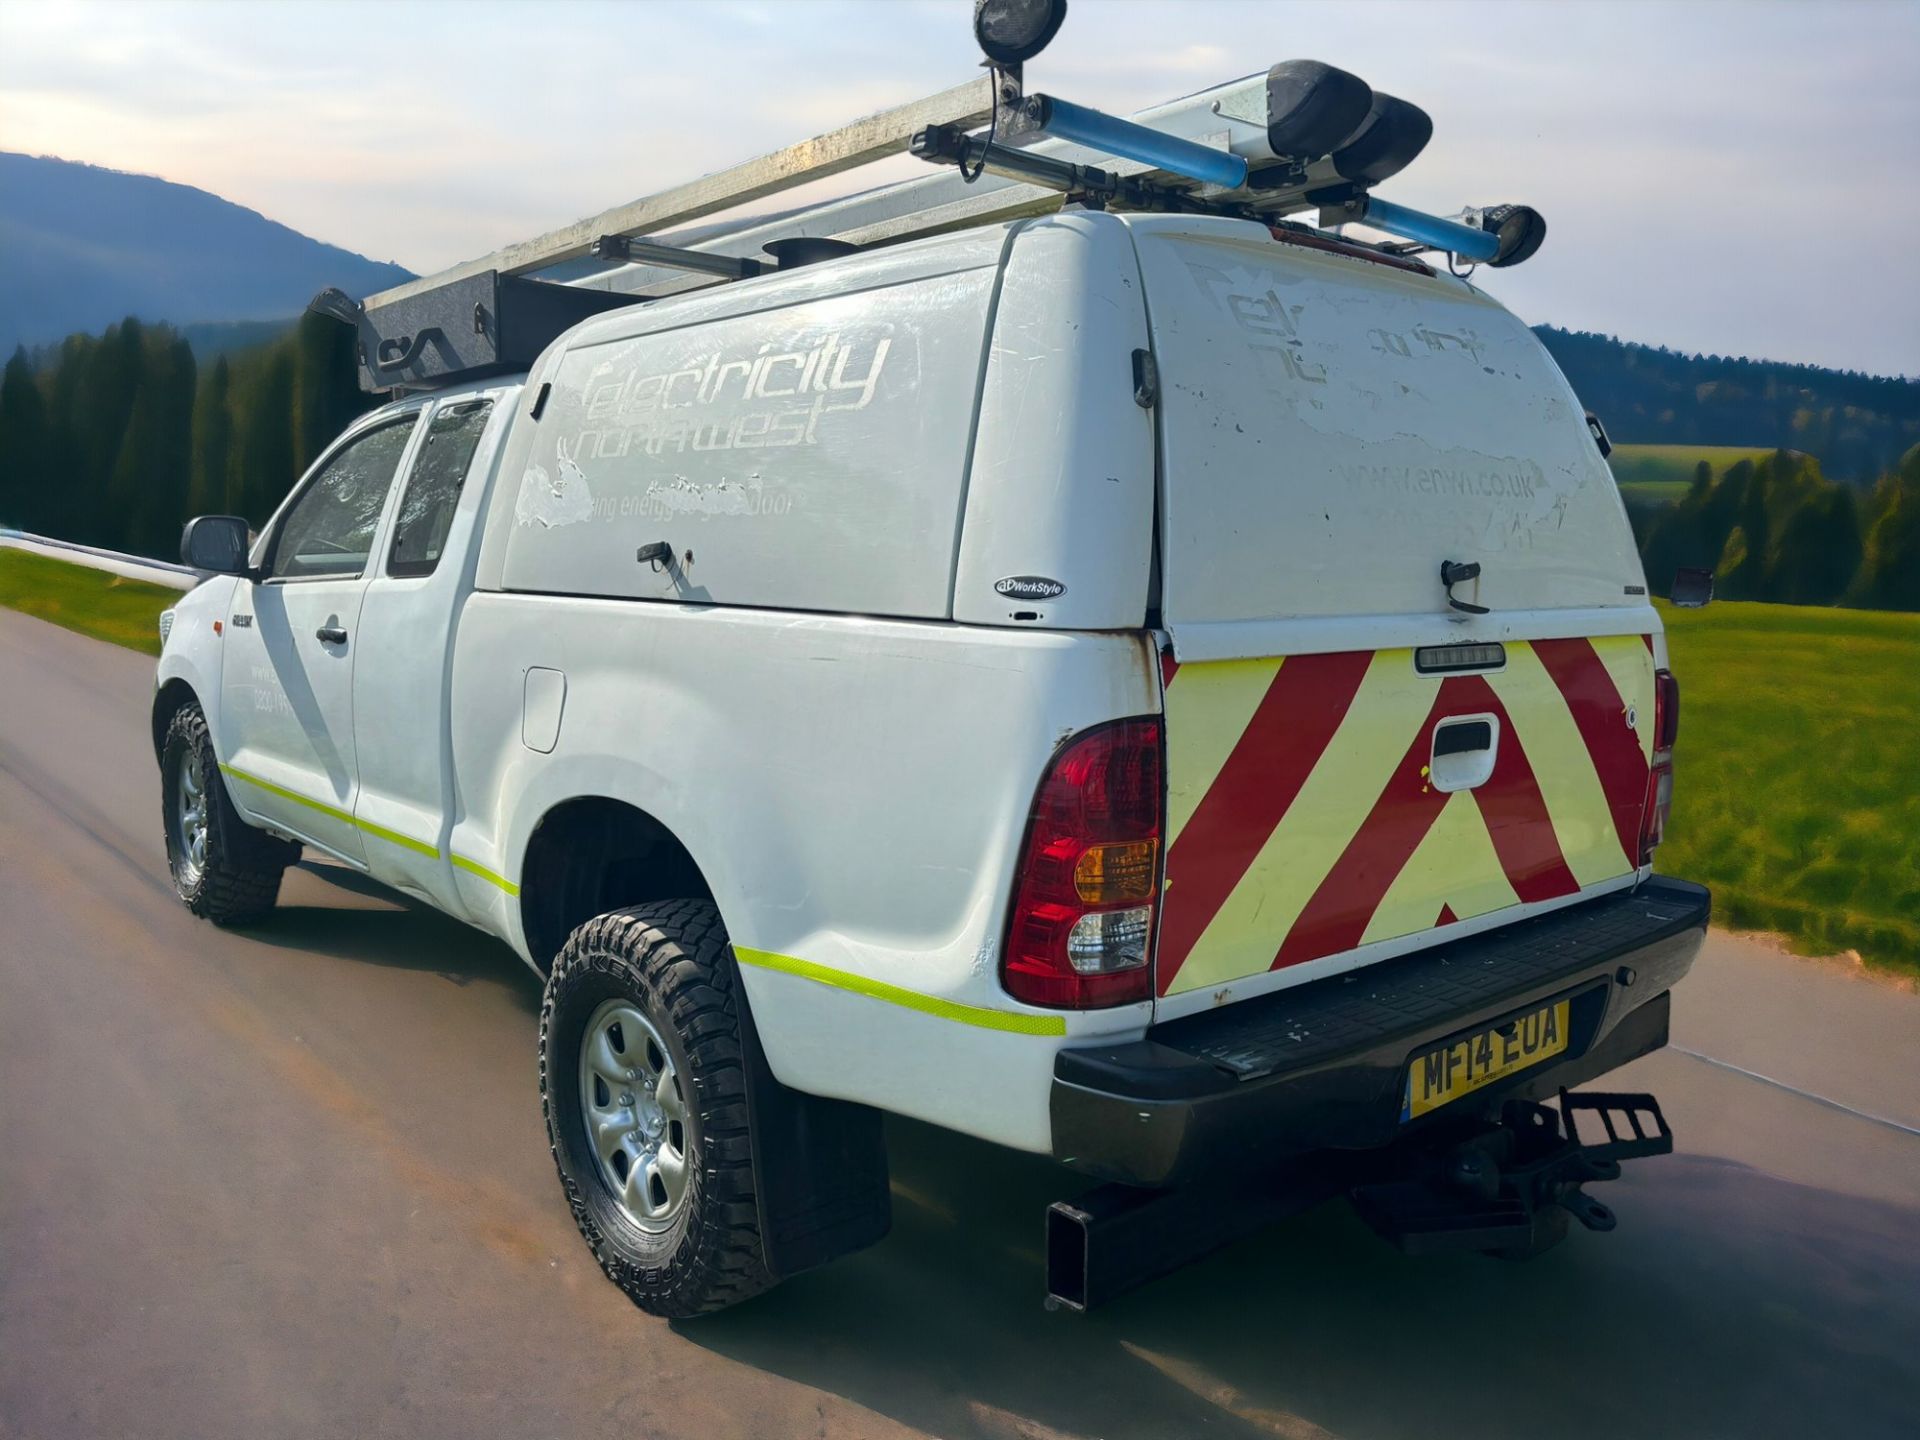 TOYOTA HILUX KING CAB PICKUP TRUCK - Image 3 of 8